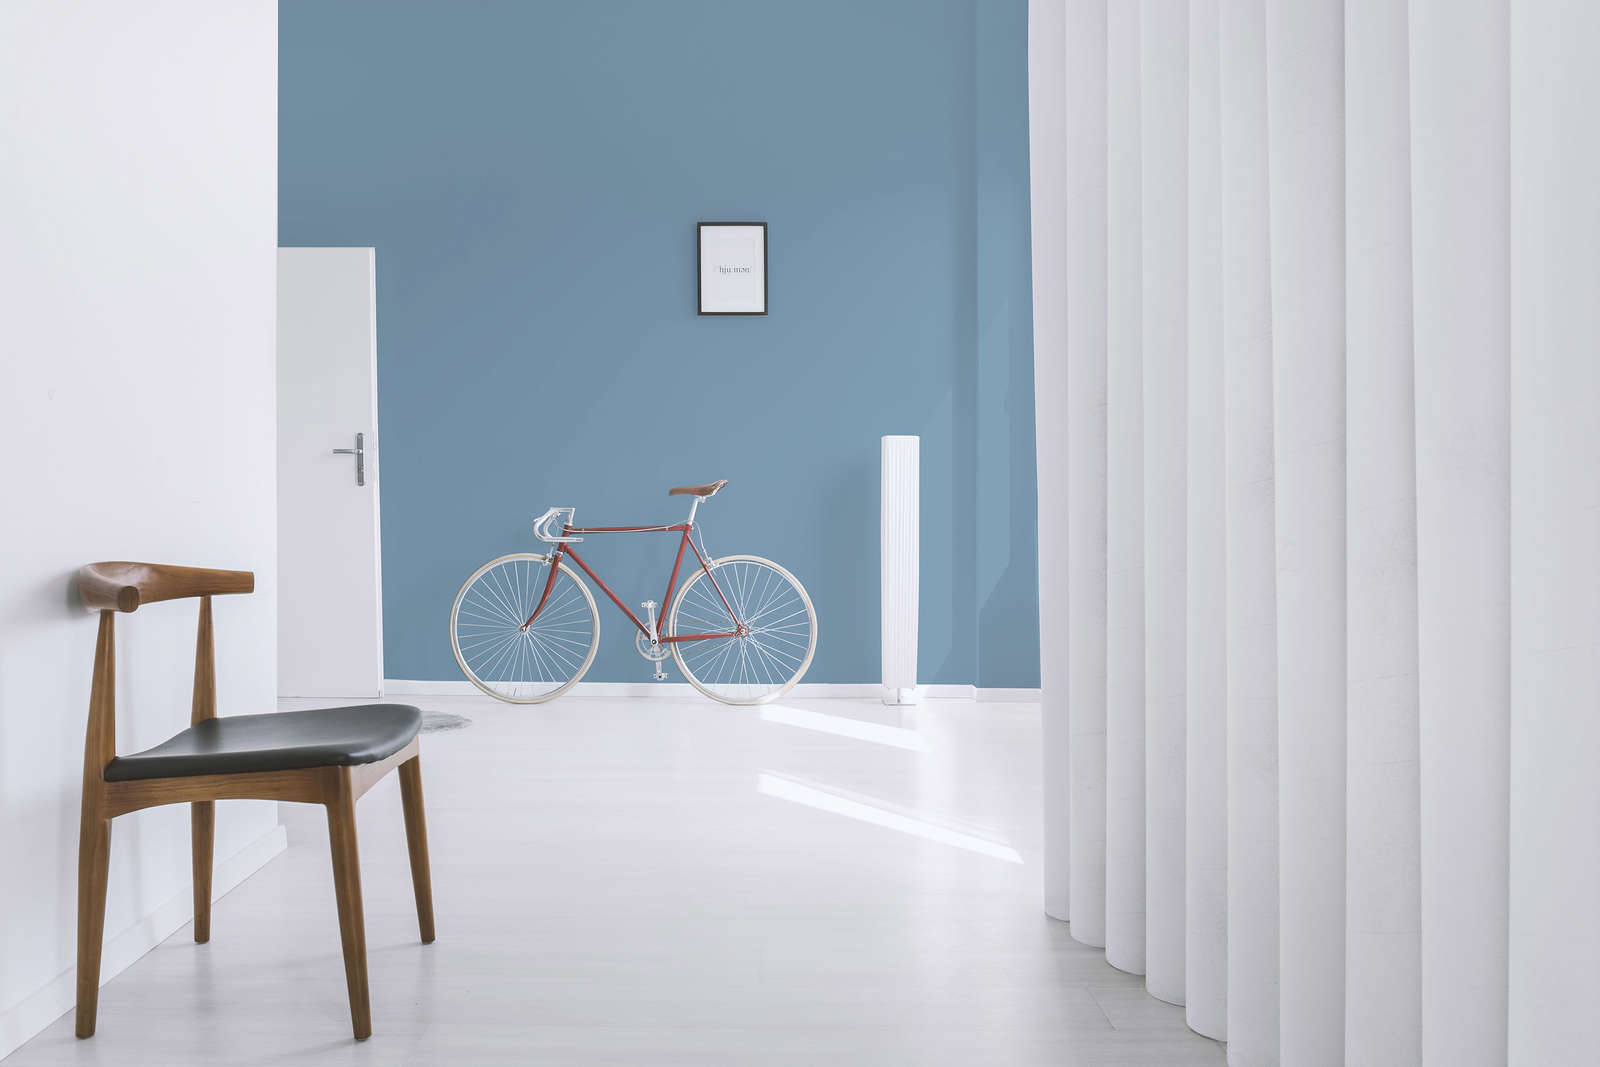             Premium Wall Paint Serene Nordic Blue »Blissful Blue« NW306 – 5 litre
        